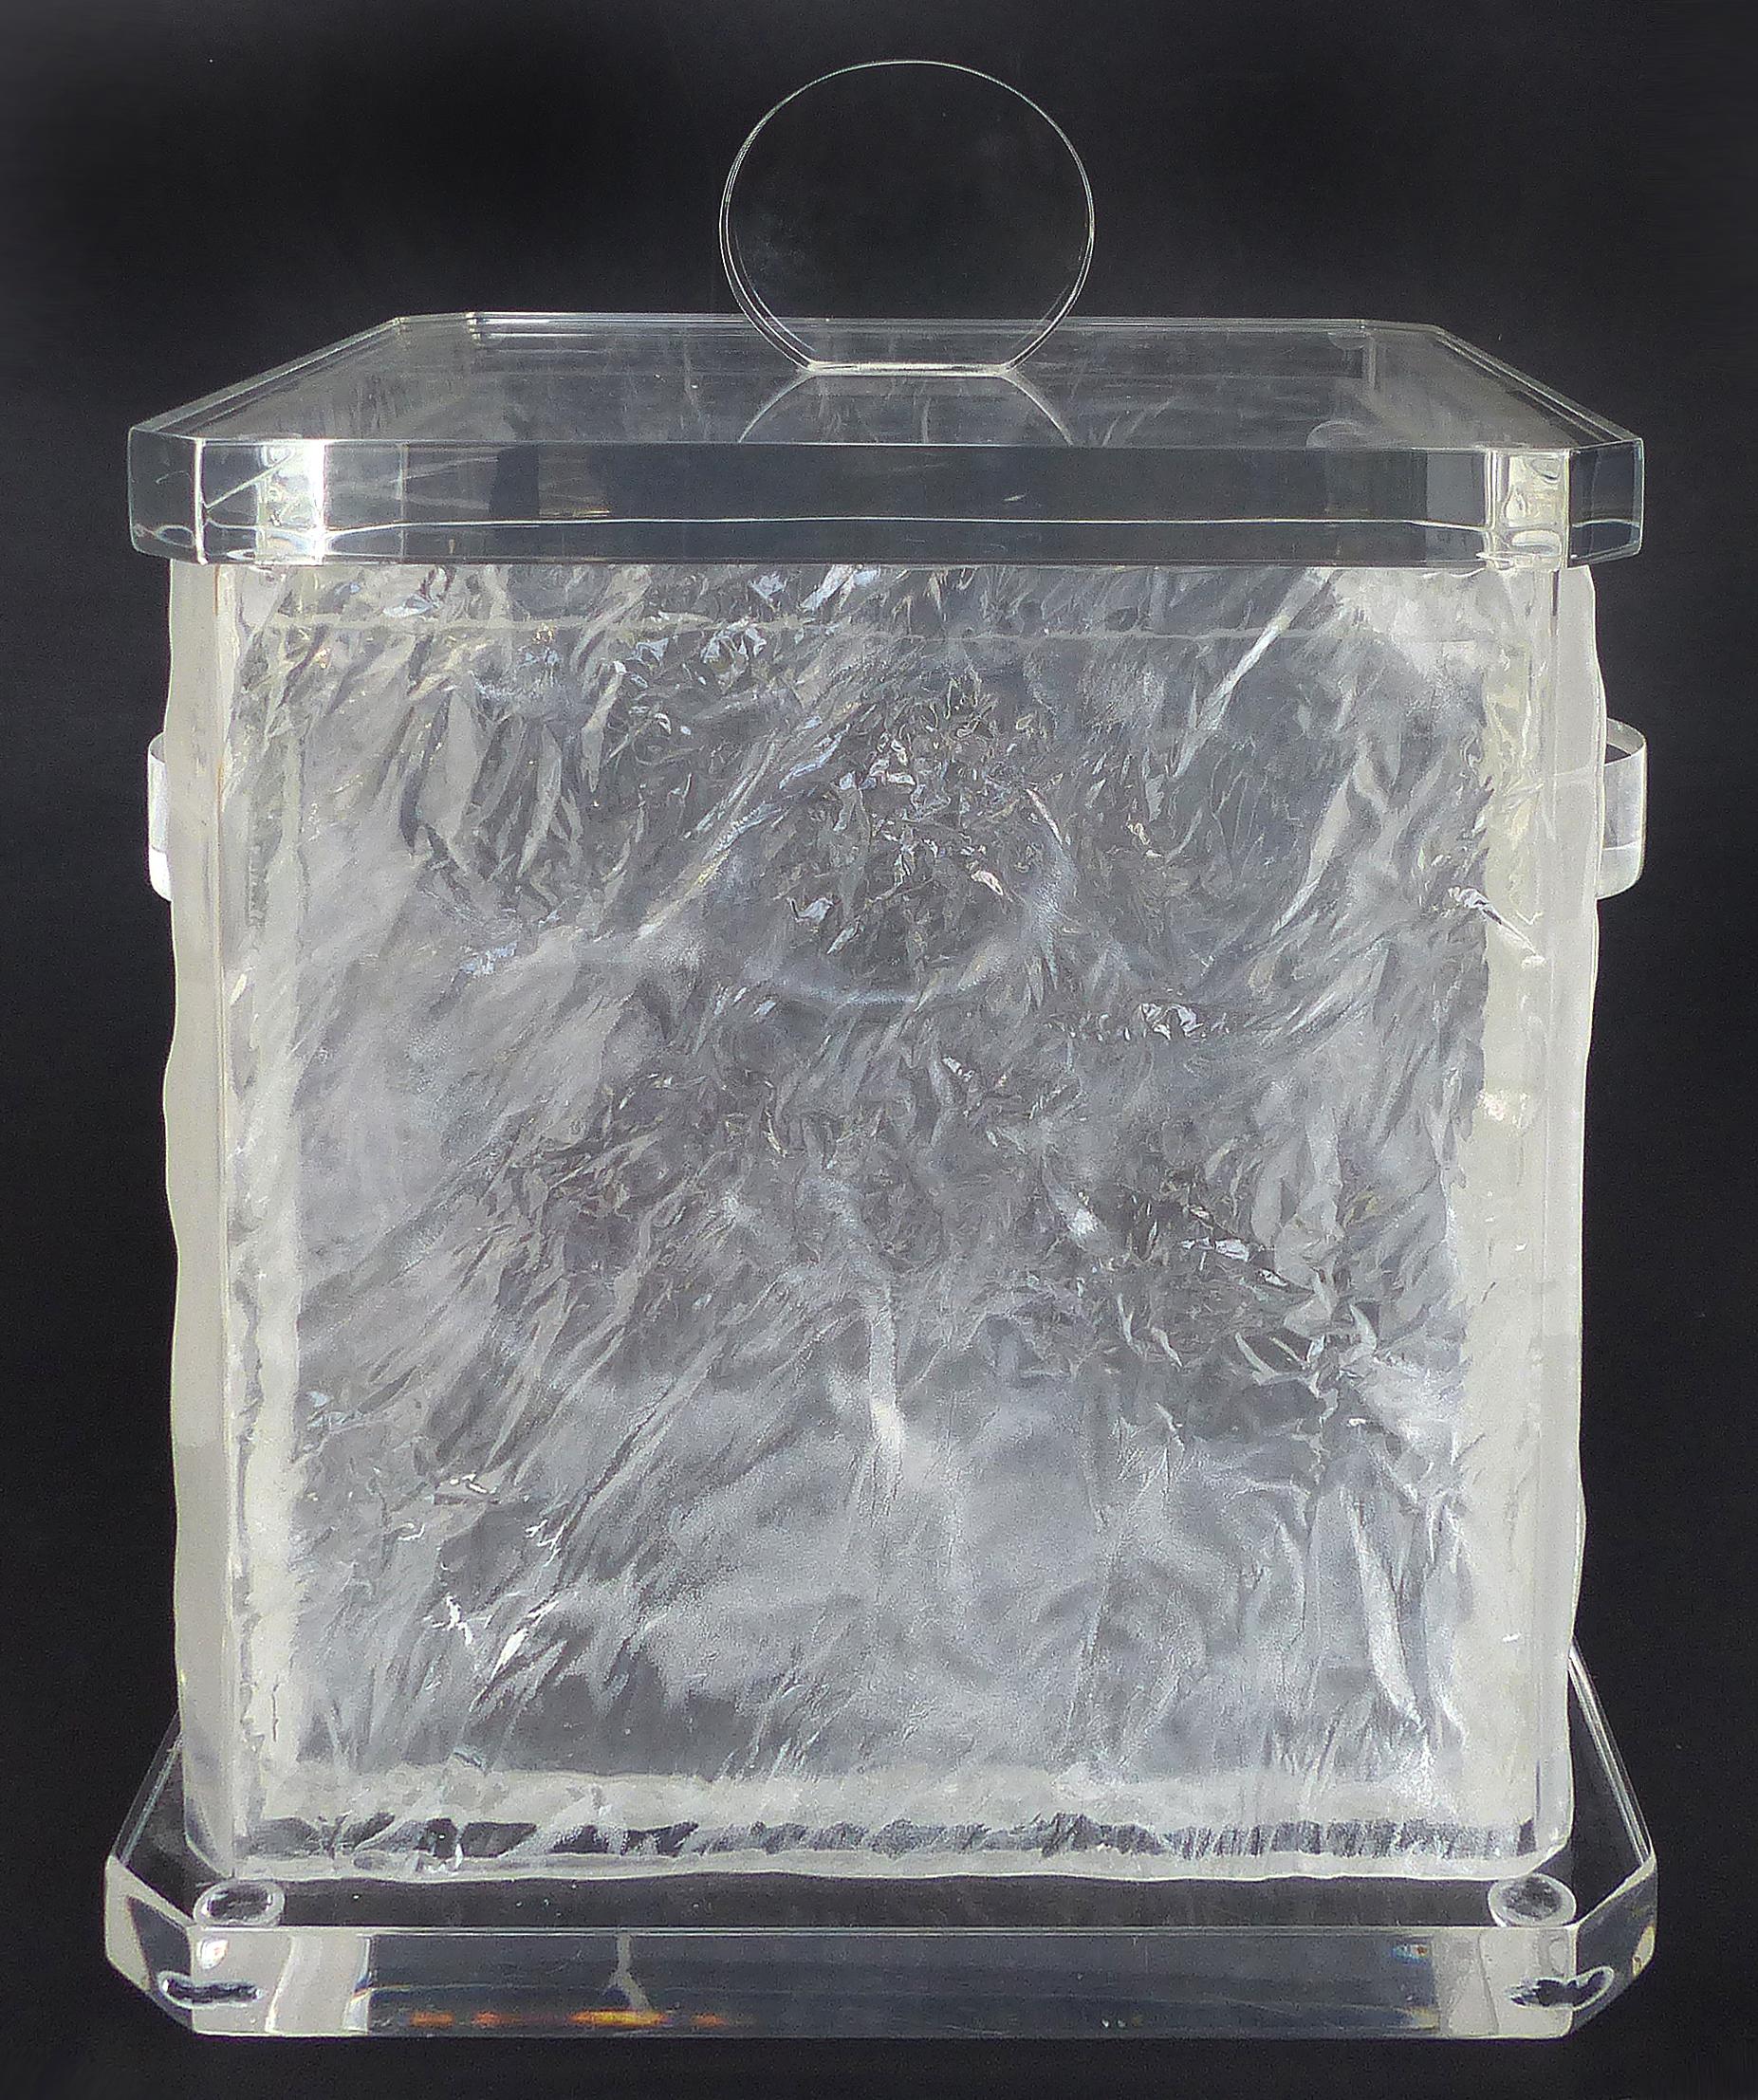 Mid-Century Modern Lucite Ice Bucket with Liner and Cover

Offered for sale is a substantial Mid-Century Modern Lucite ice bucket with liner and cover. The bucket mixes thick polished Lucite with a chipped-ice textured body. This large and heavy ice